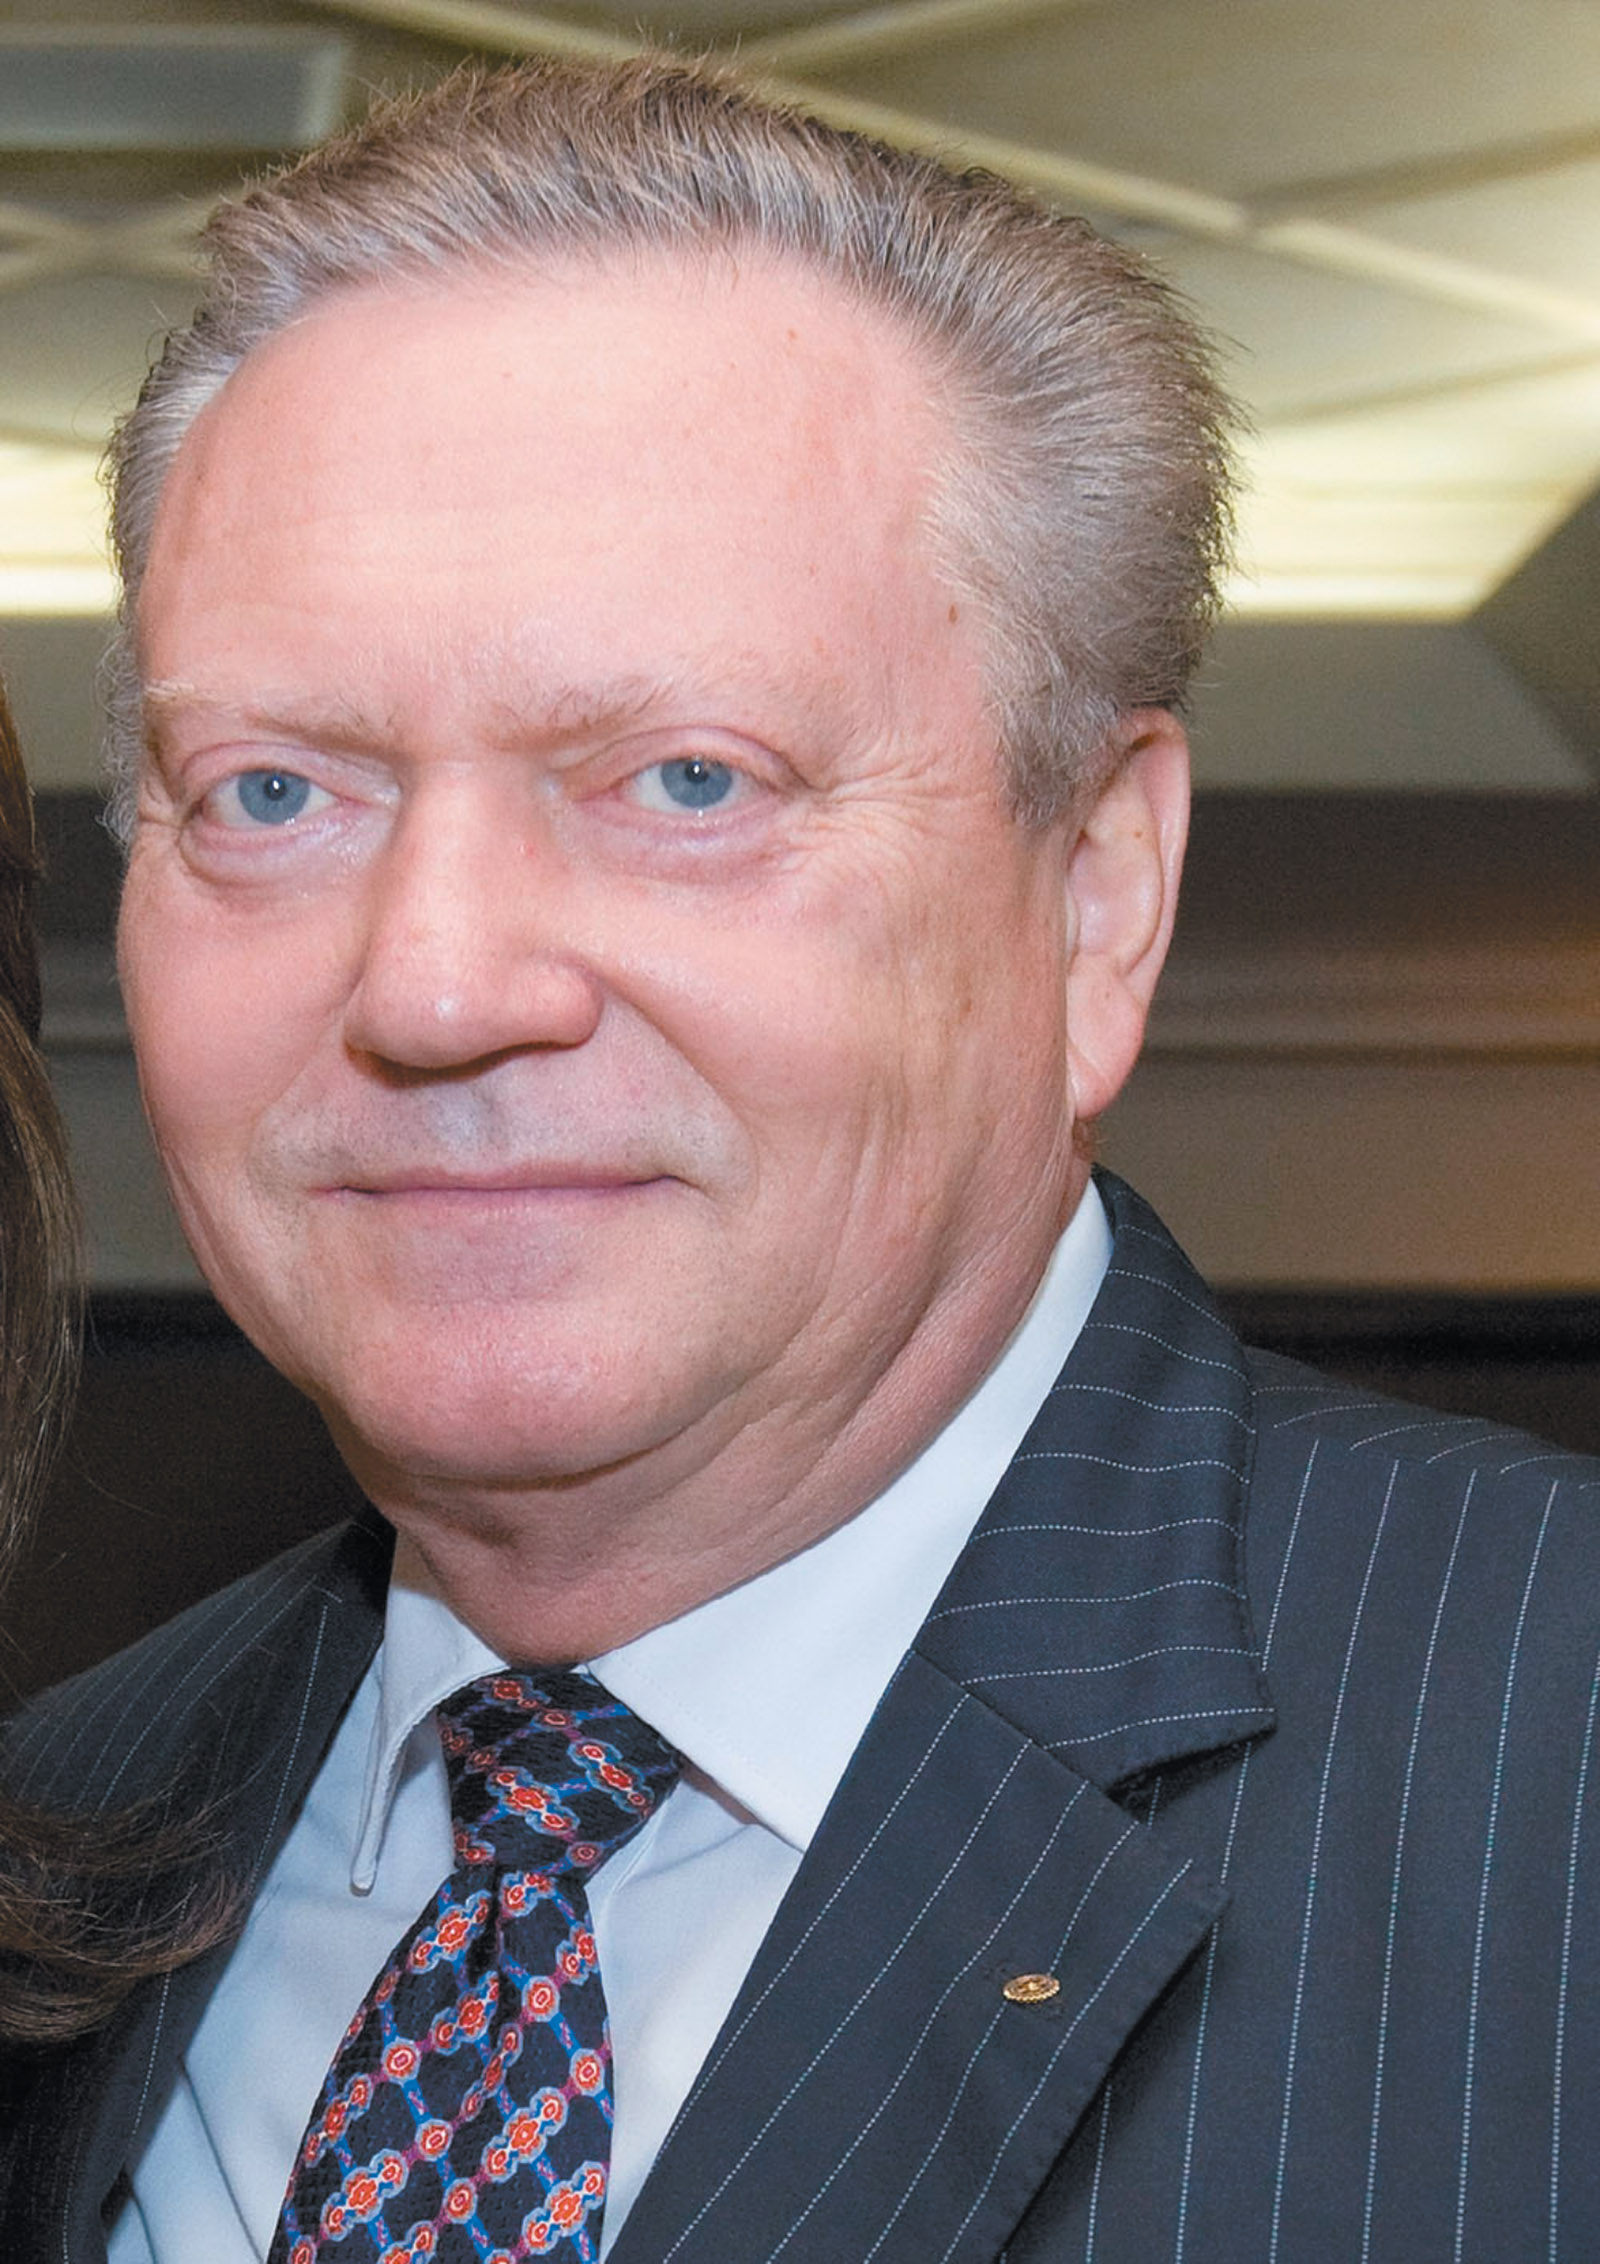 Jürgen Mossack, co-founder of the Panamanian law firm Mossack Fonseca, whose practices of tax evasion were leaked in the Panama Papers, June 2014 